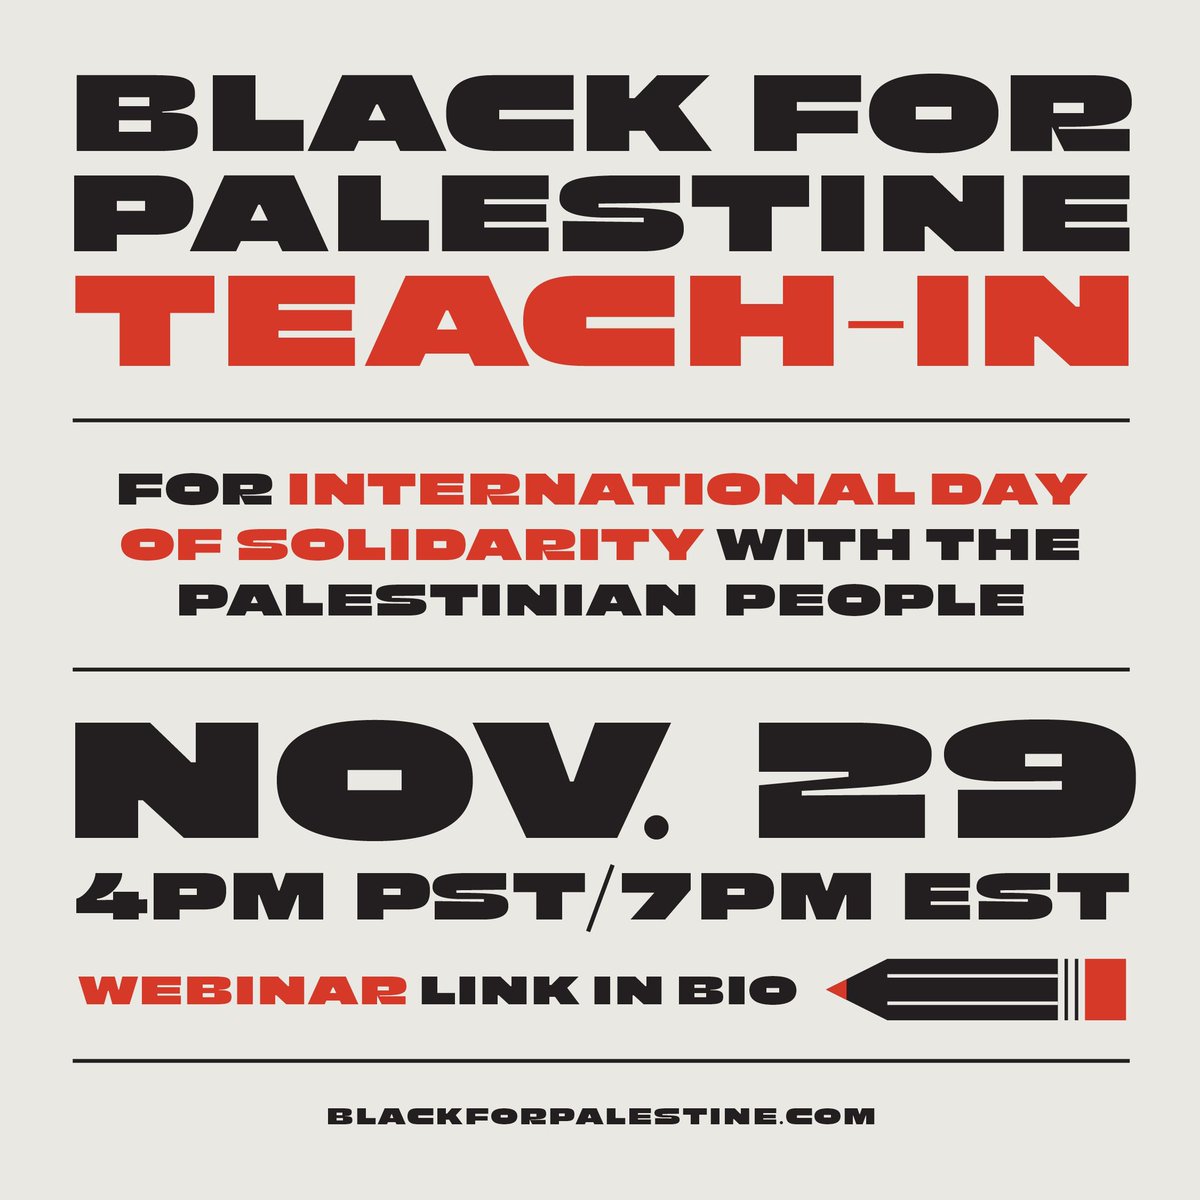 BLACK FOR PALESTINE TEACH-IN: our first webinar in honor of International Day of Solidarity with the Palestinian People wednesday nov. 29 at 4pm PT/7pm ET 🖤❤️💚🤍 registration link: bit.ly/b4psolidarity